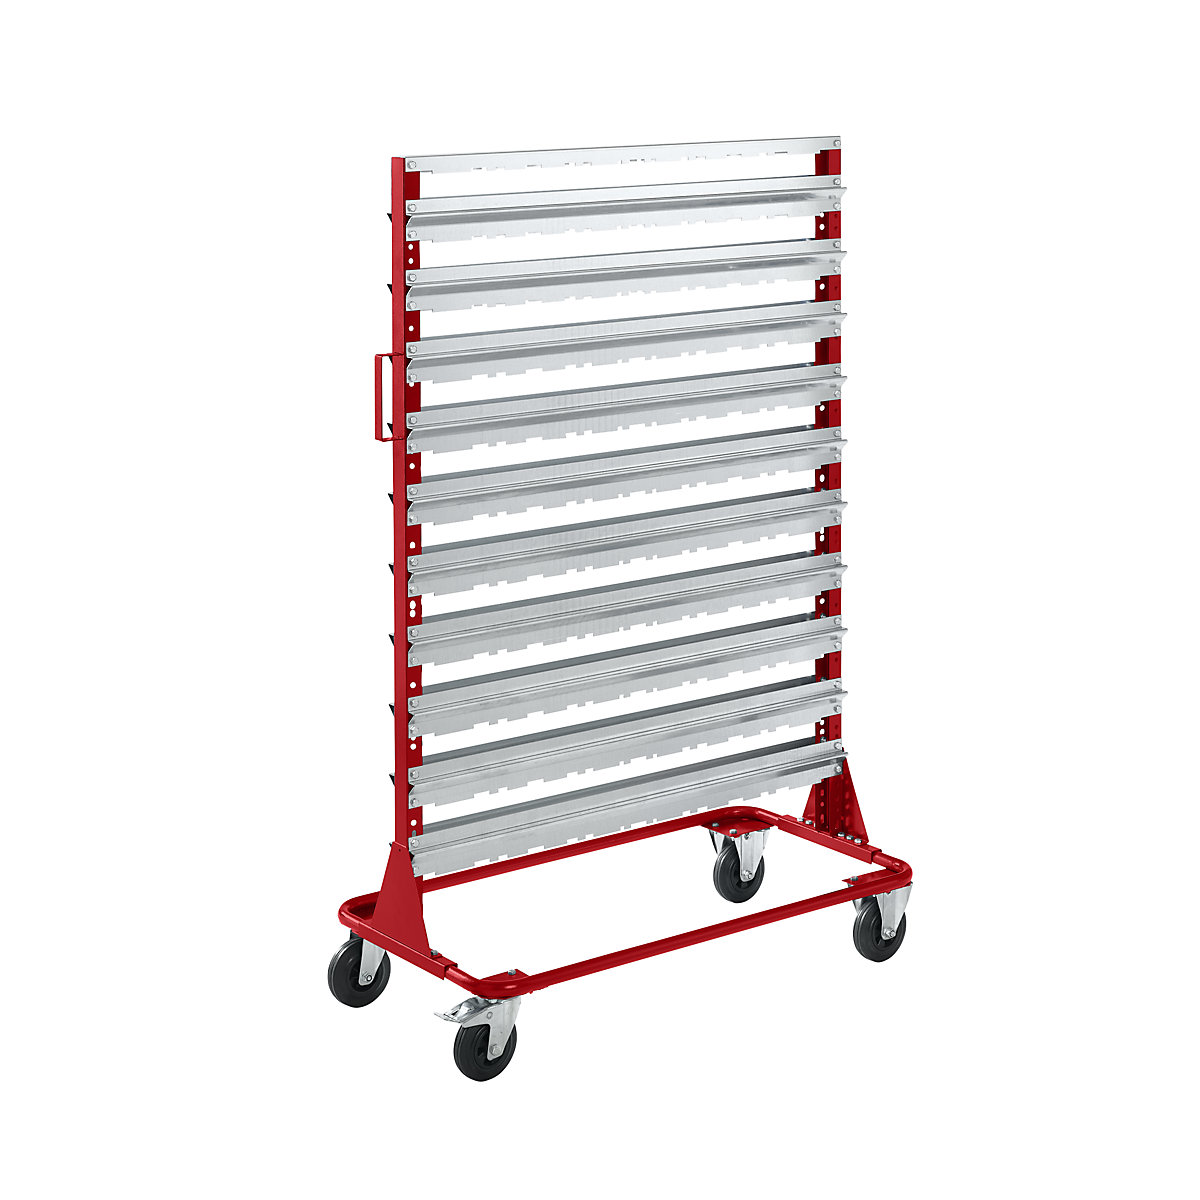 Mobile rack, height 1588 mm, mobile rack for 160 open fronted storage bins, flame red-3